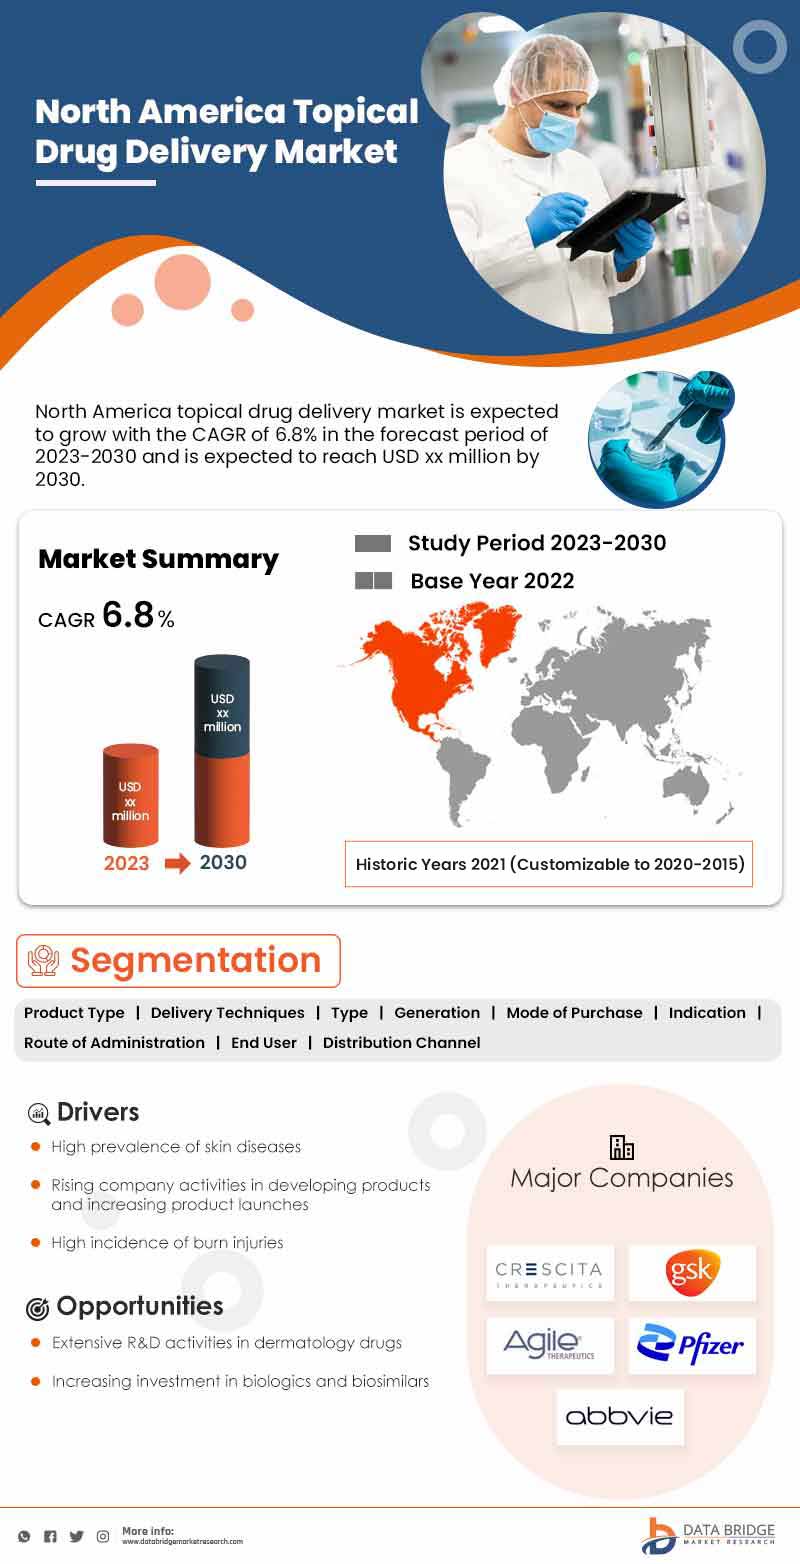 North America Topical Drug Delivery Market